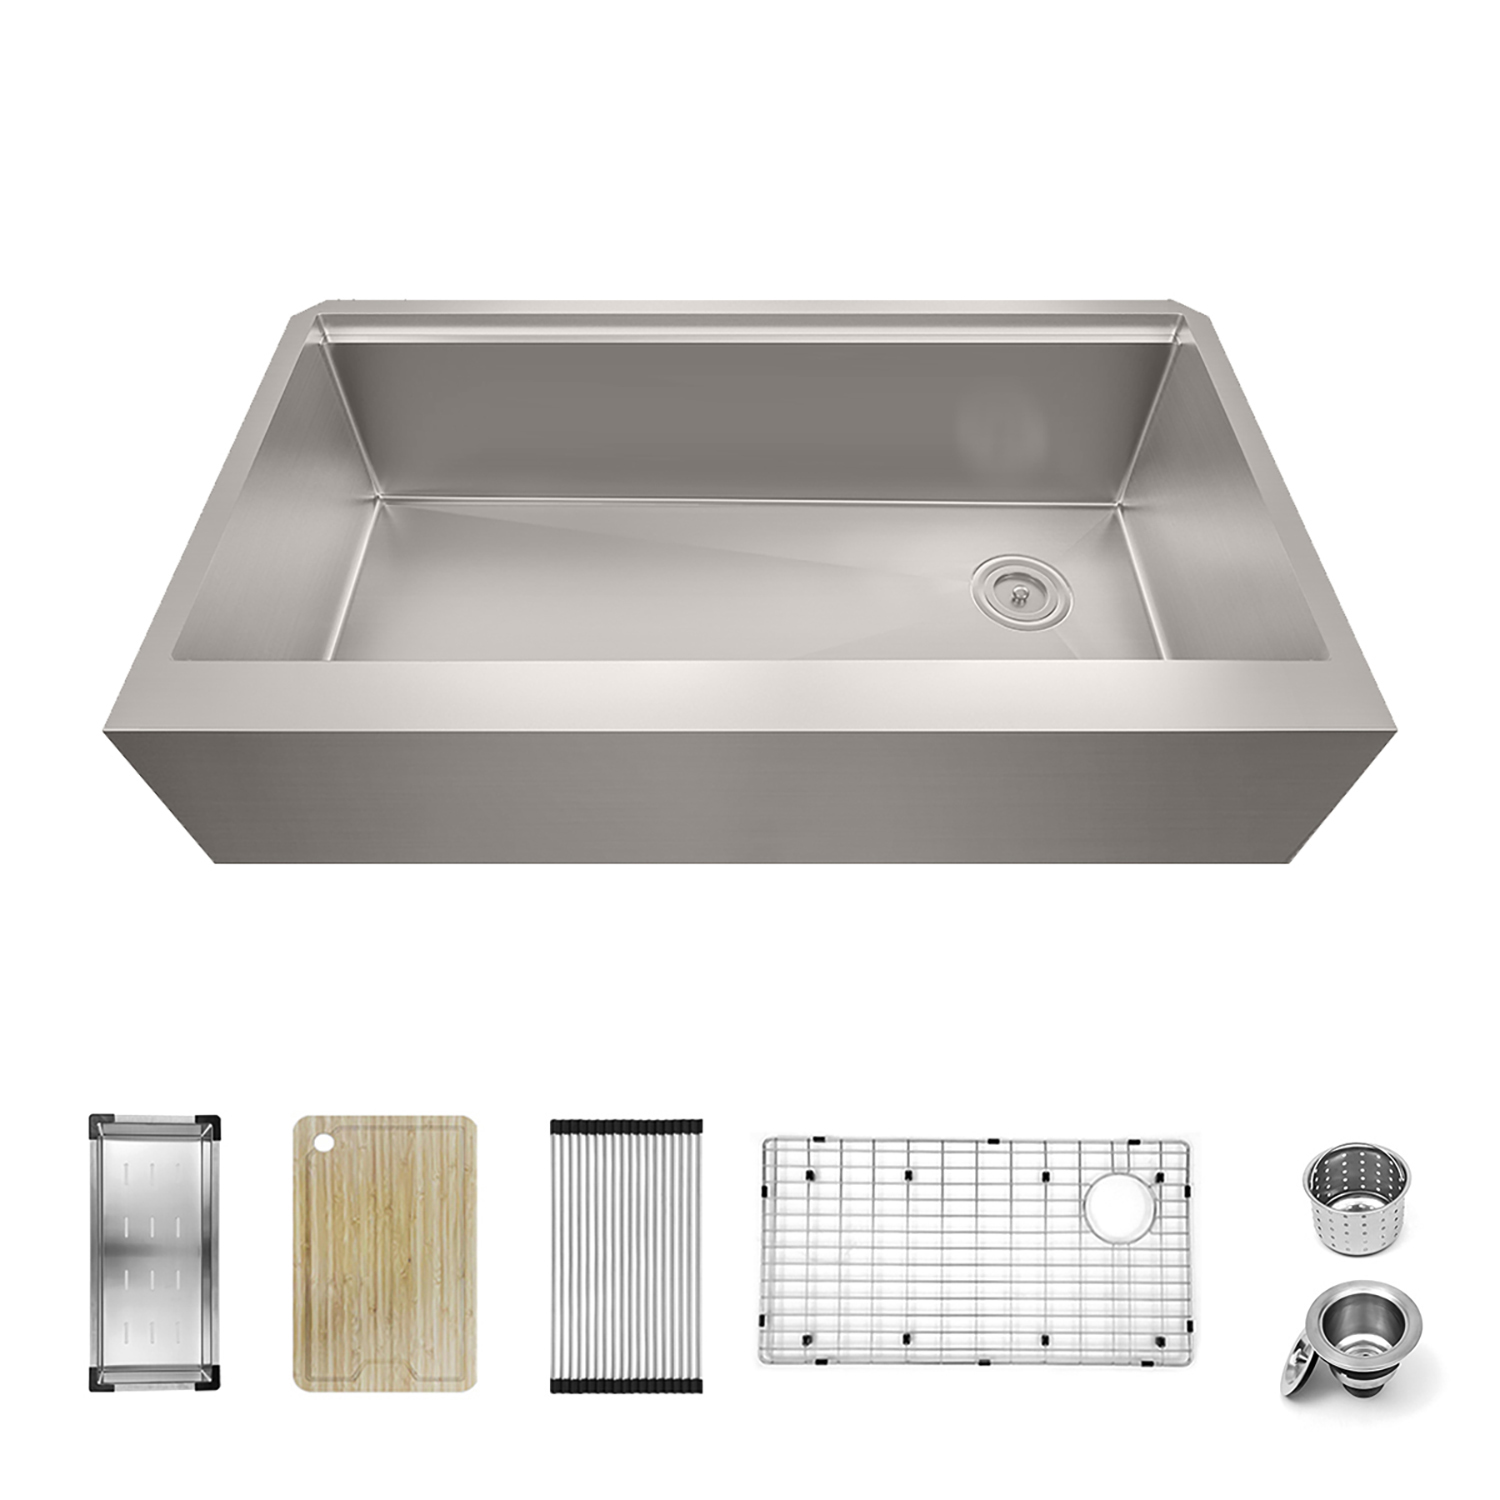 KSS0006S-OL 36" 16 Gauge Single Bowl 304 Stainless Steel Workstation Farmhouse Apron Kitchen Sink With Accessories